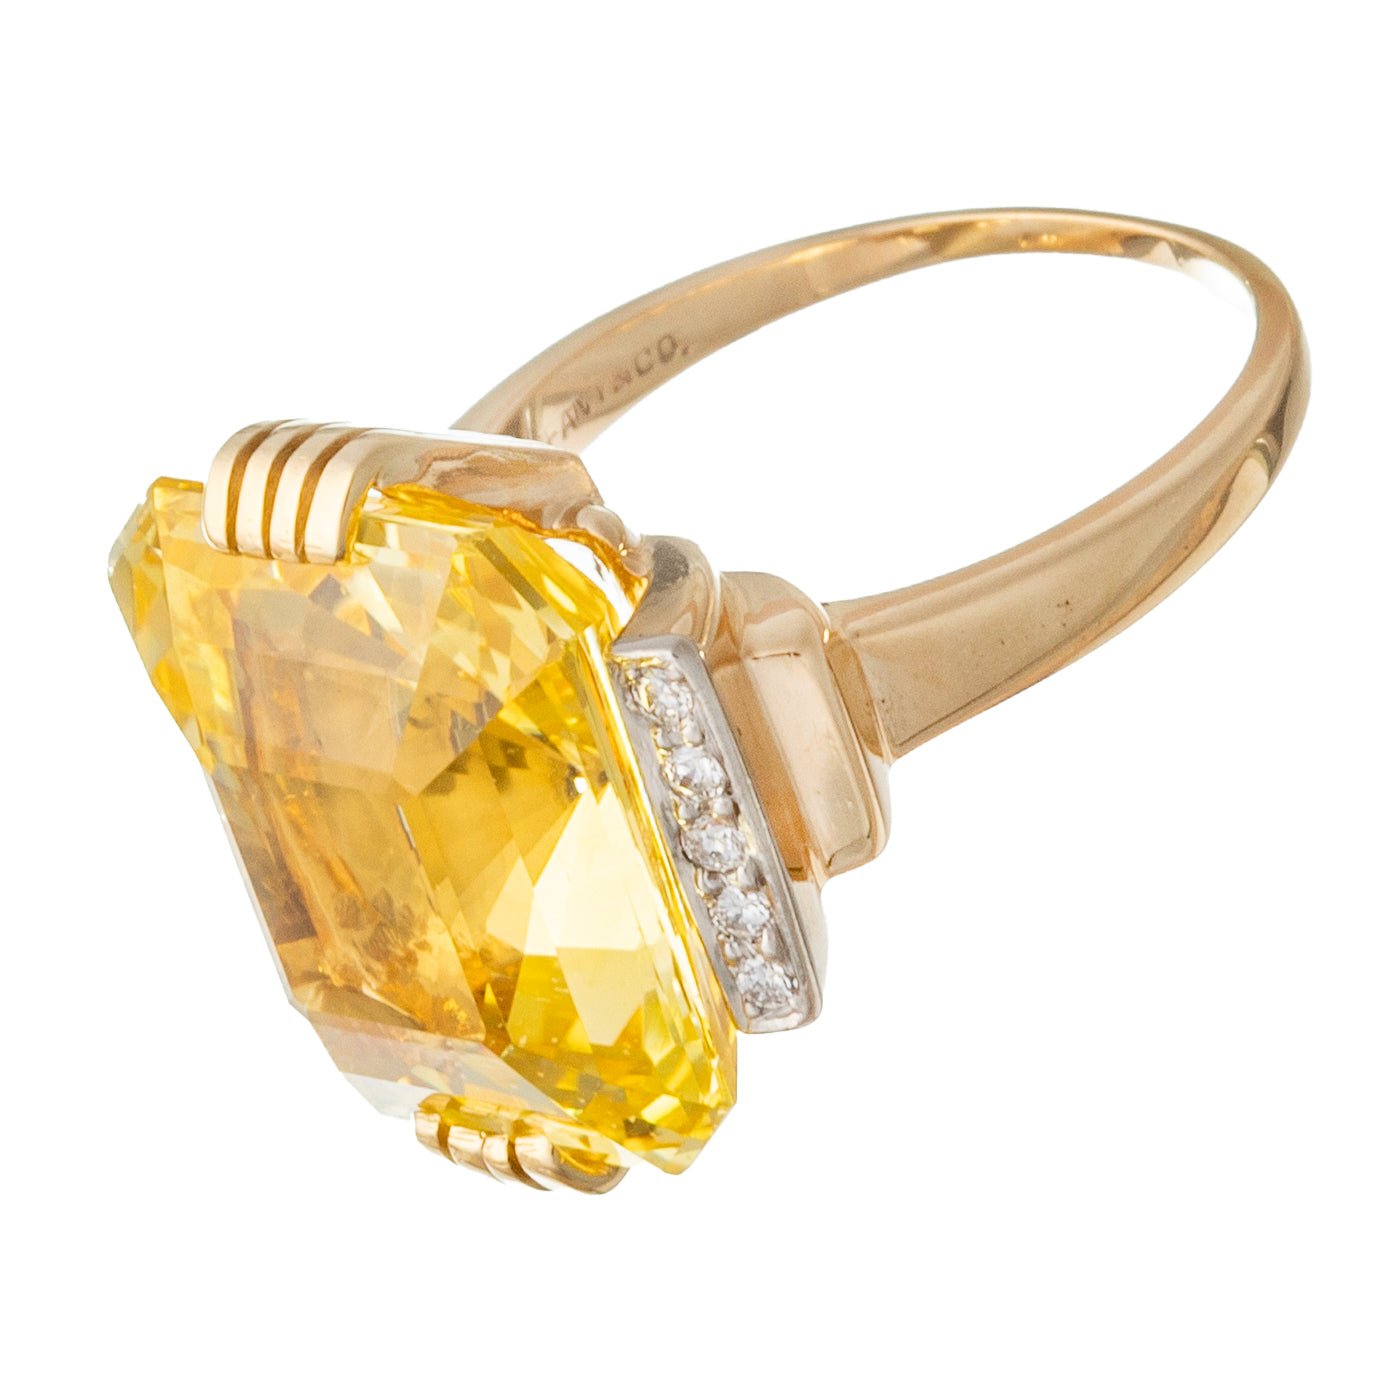 Yellow Sapphire and Diamond Ring in Gold - Size 7 - Gardens of the Sun |  Ethical Jewelry